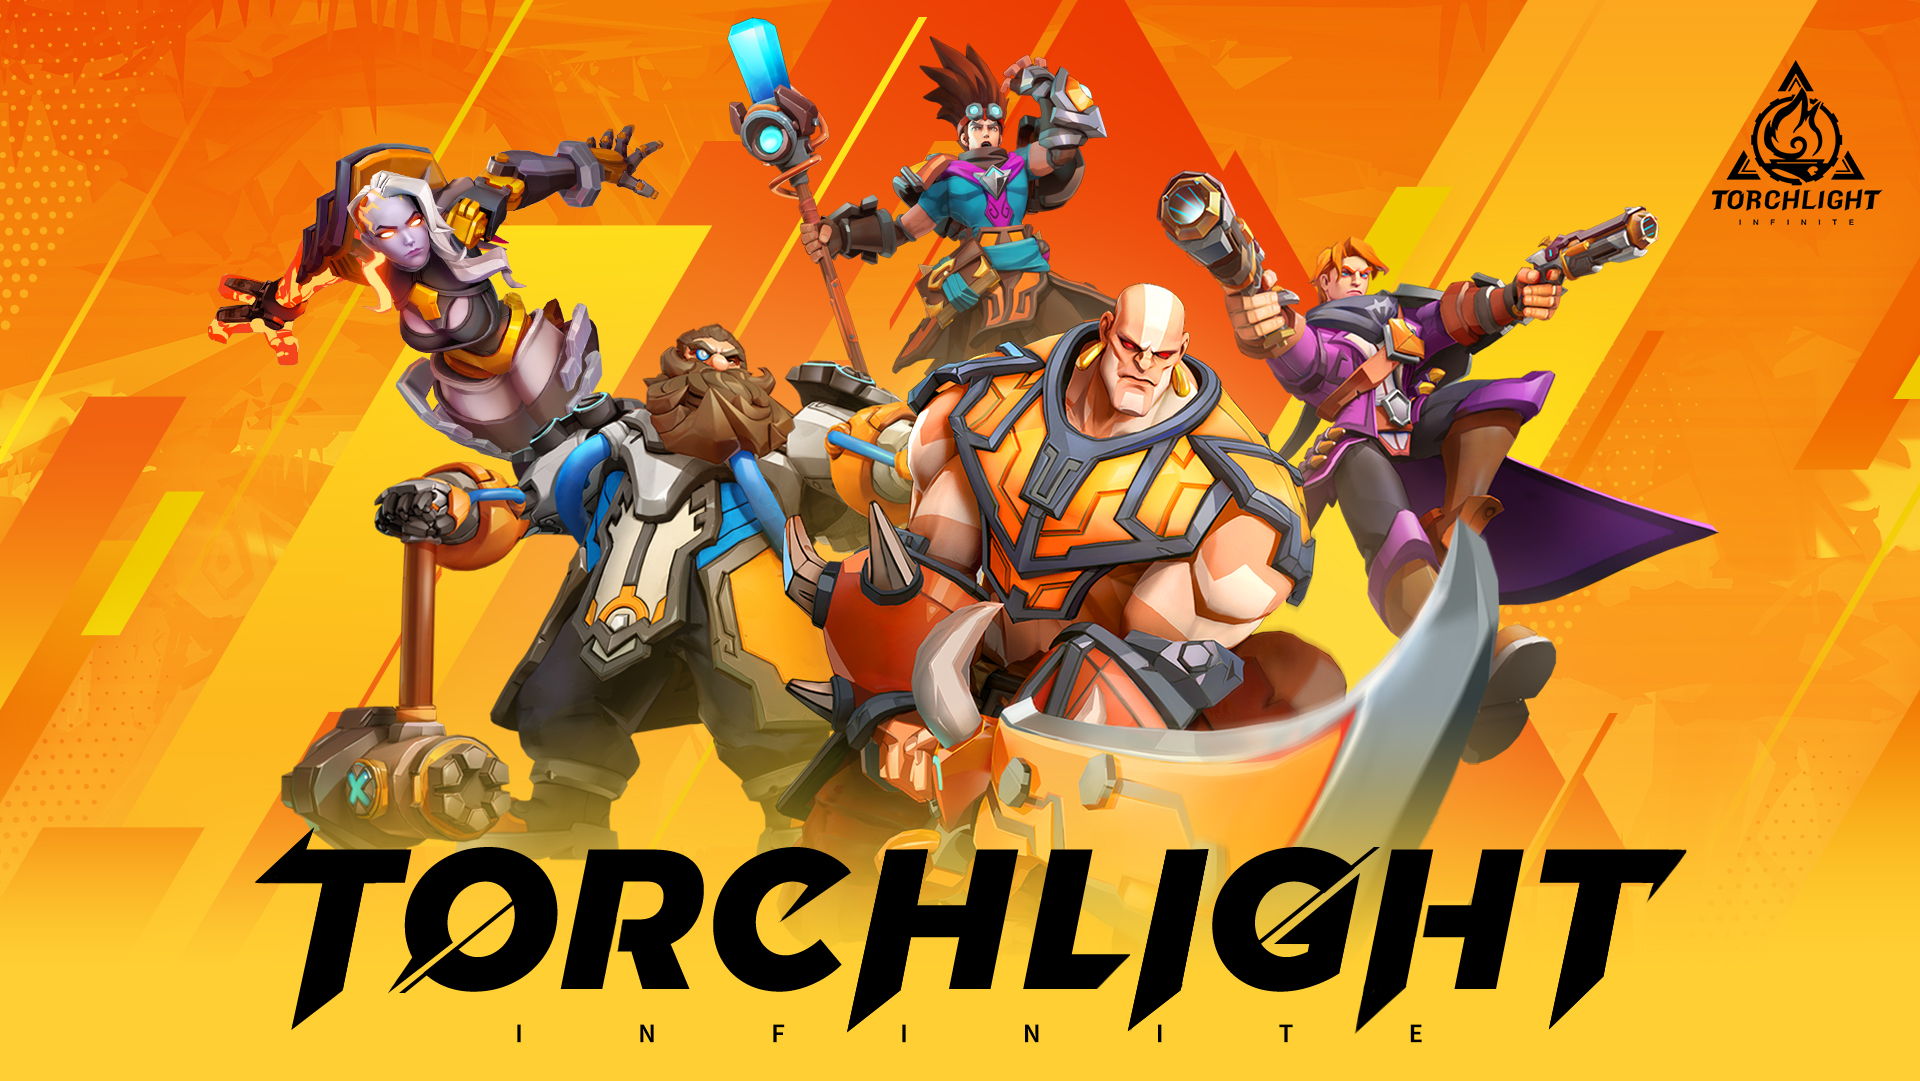 Google Play Pre-Registration For Torchlight: Infinite Now Live